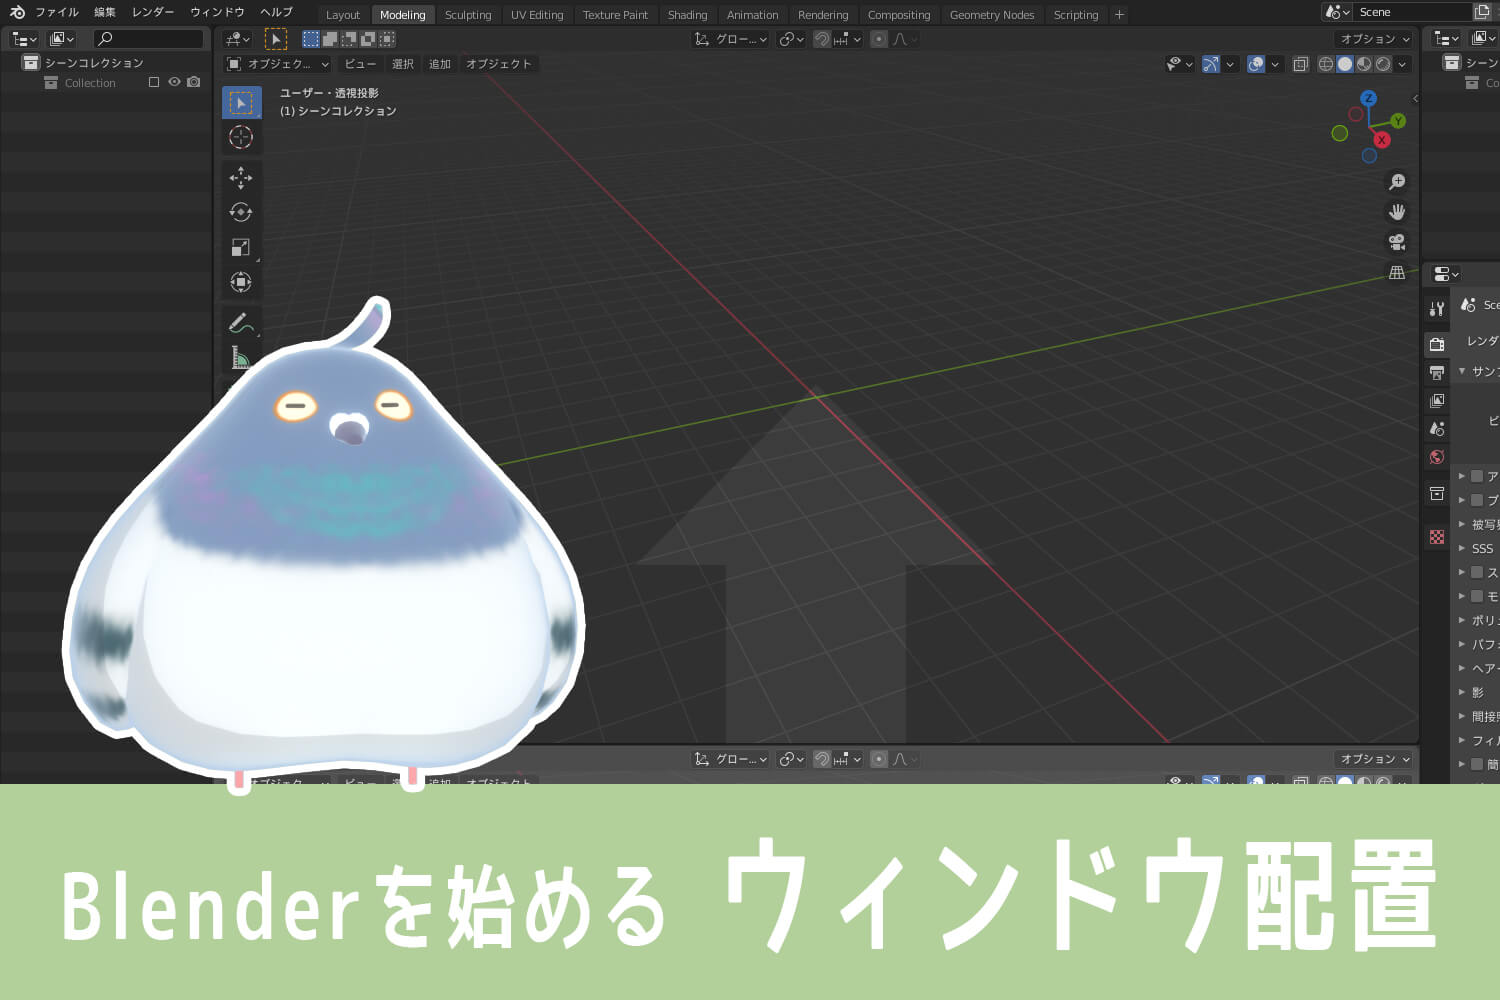 START Blender 2) - Changing Window Placement & Settings Freely